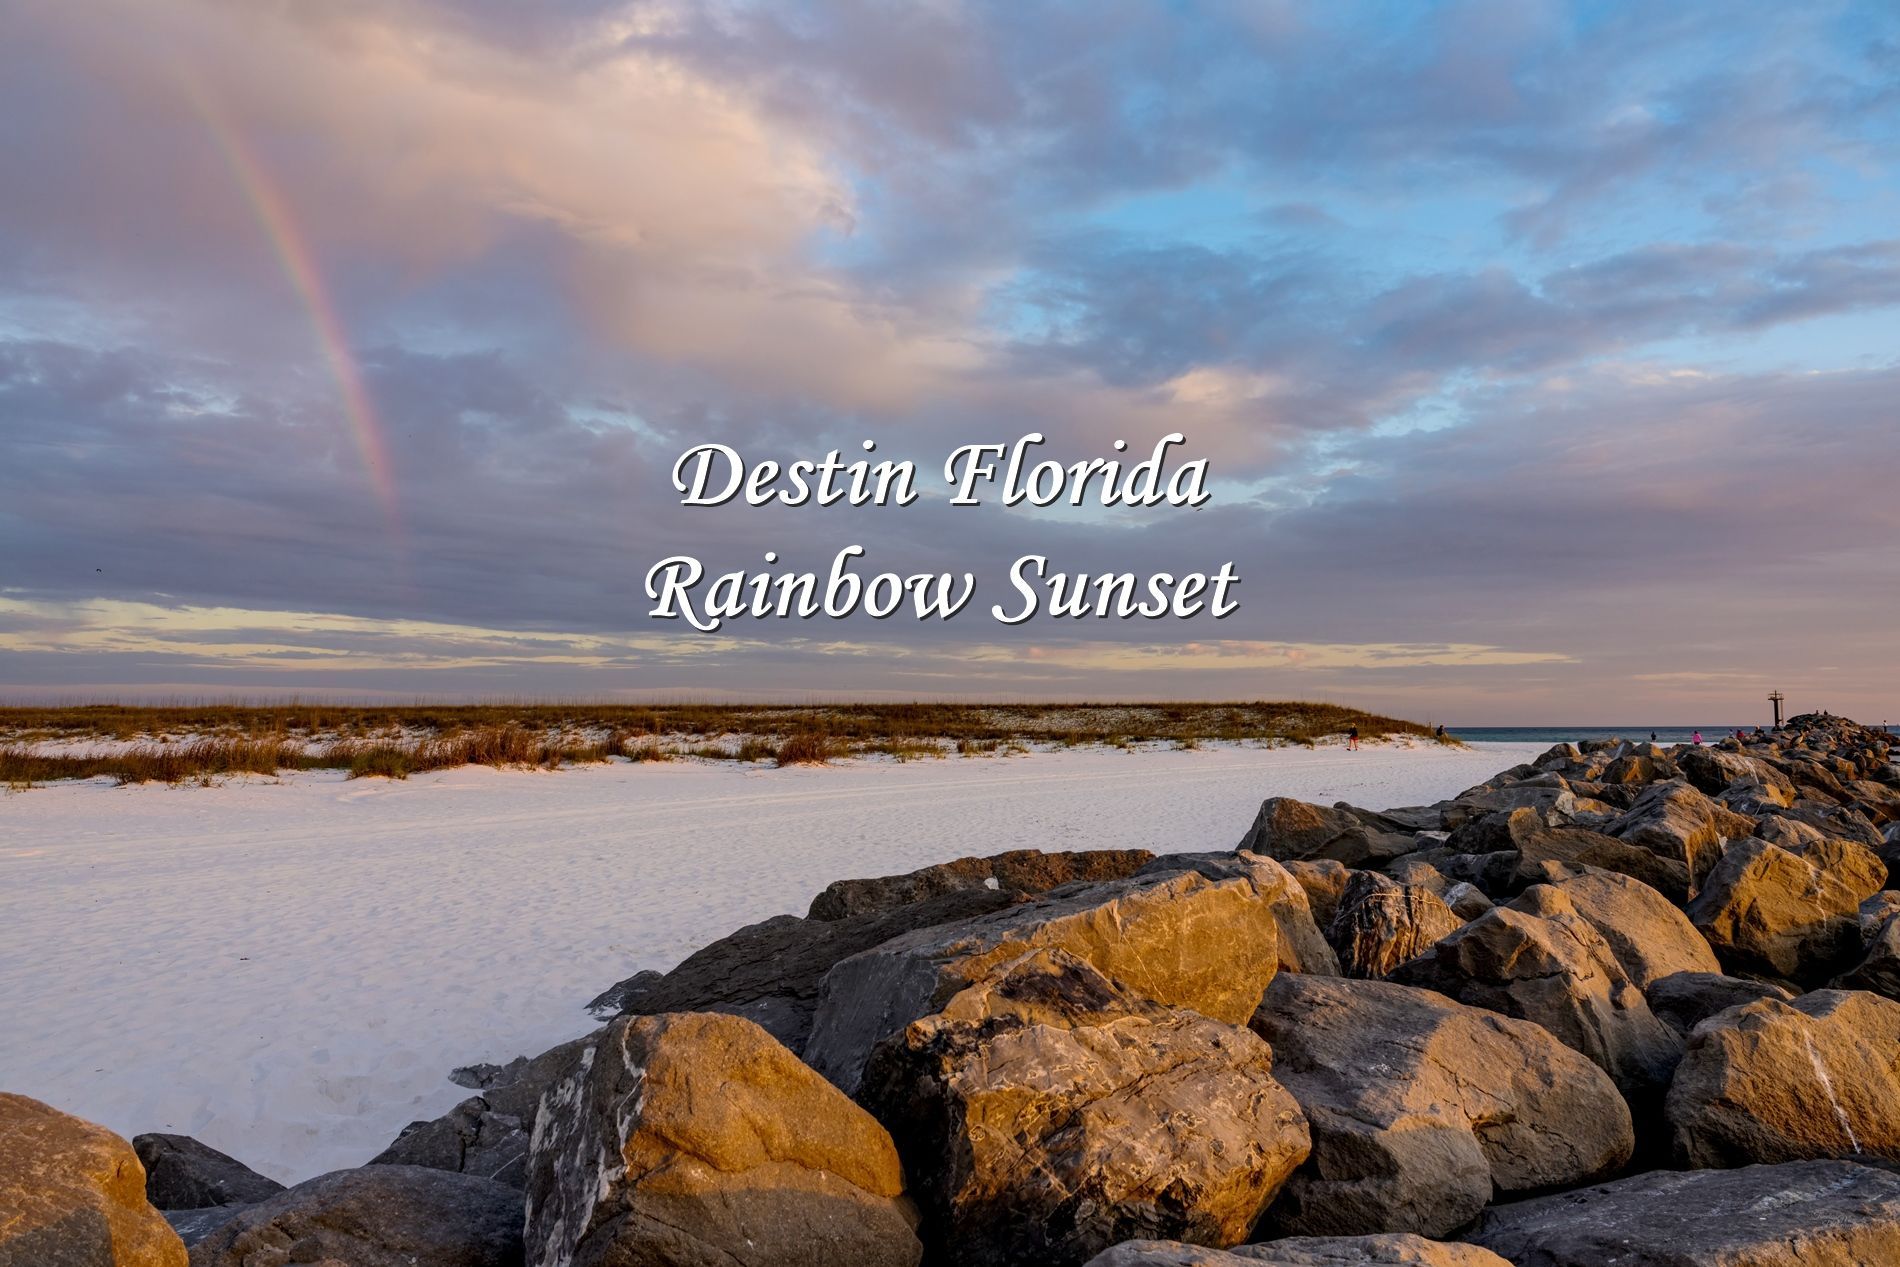 A rainbow appeared while I was taking fine art photos of a Destin Florida sunset.